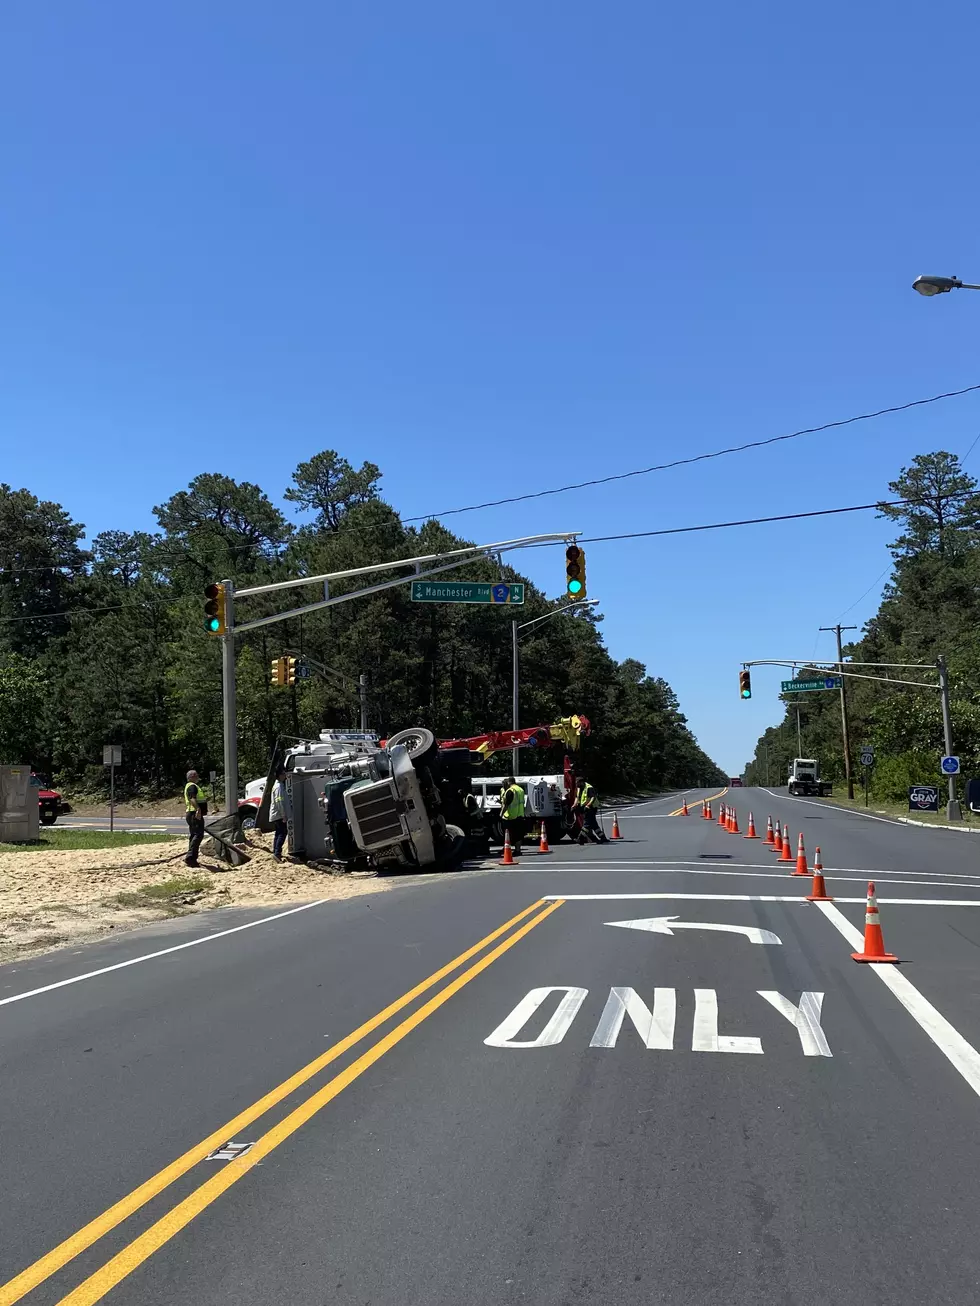 Dump truck carrying 39,000 pounds of sand turns onto its side after accident in Manchester, NJ